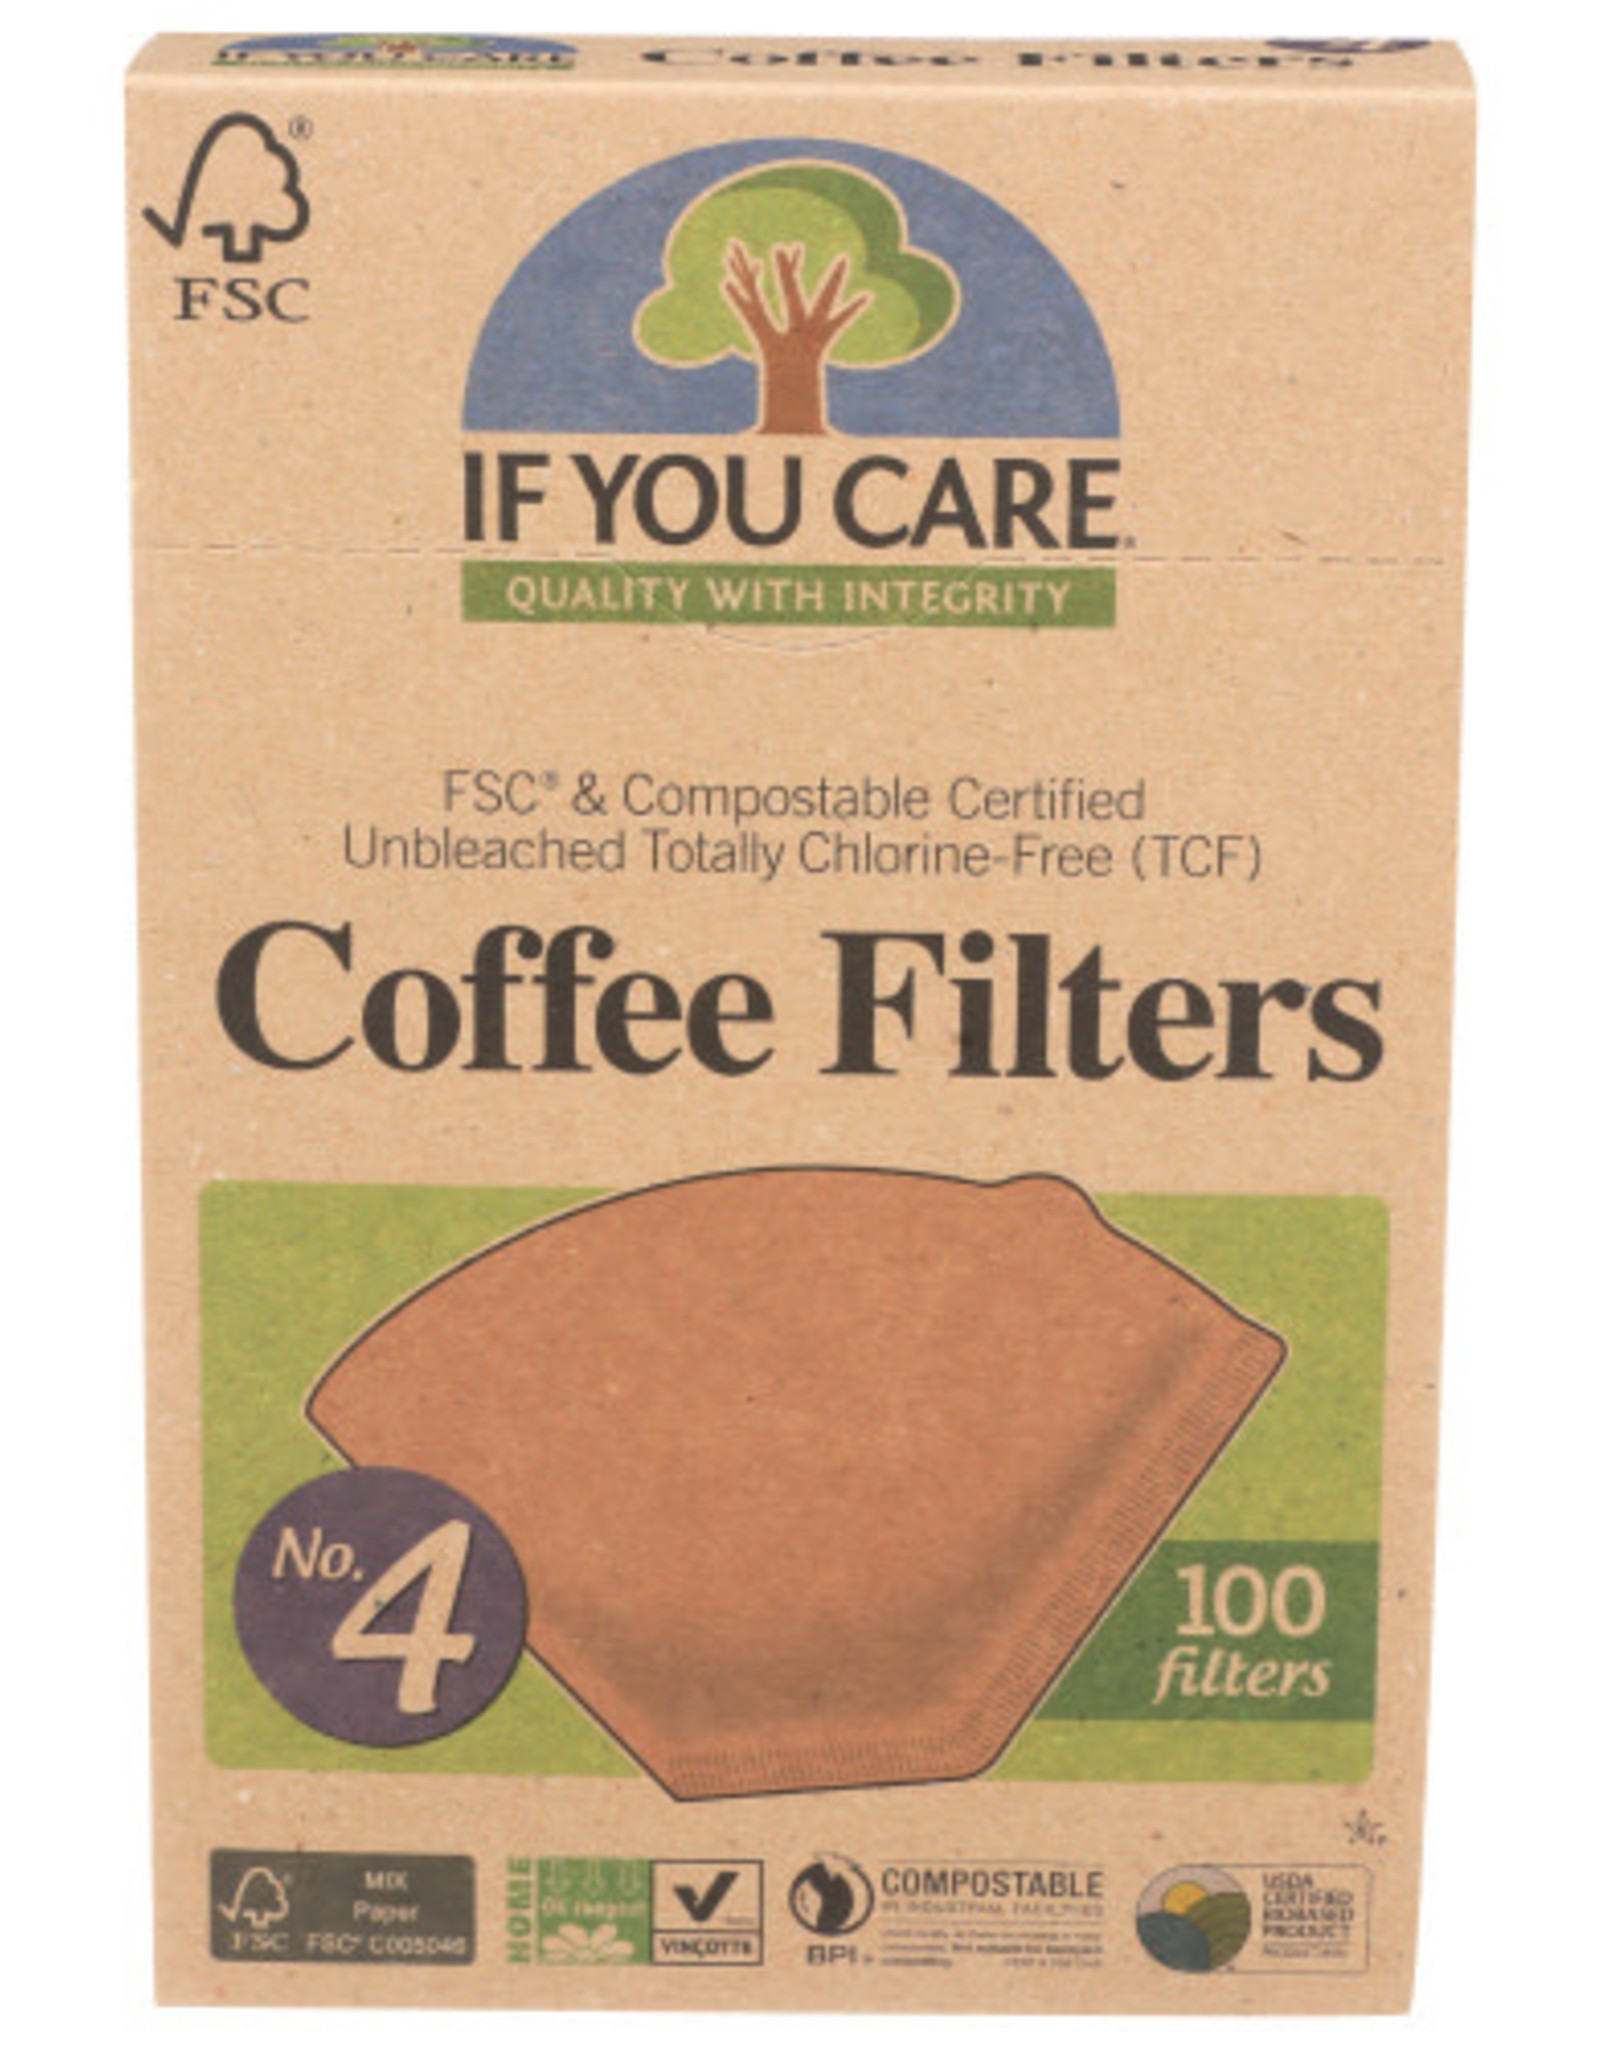 IF YOU CARE IF YOU CARE FSC CERTIFIED NO. 4 COFFEE FILTERS, 100 FILTERS